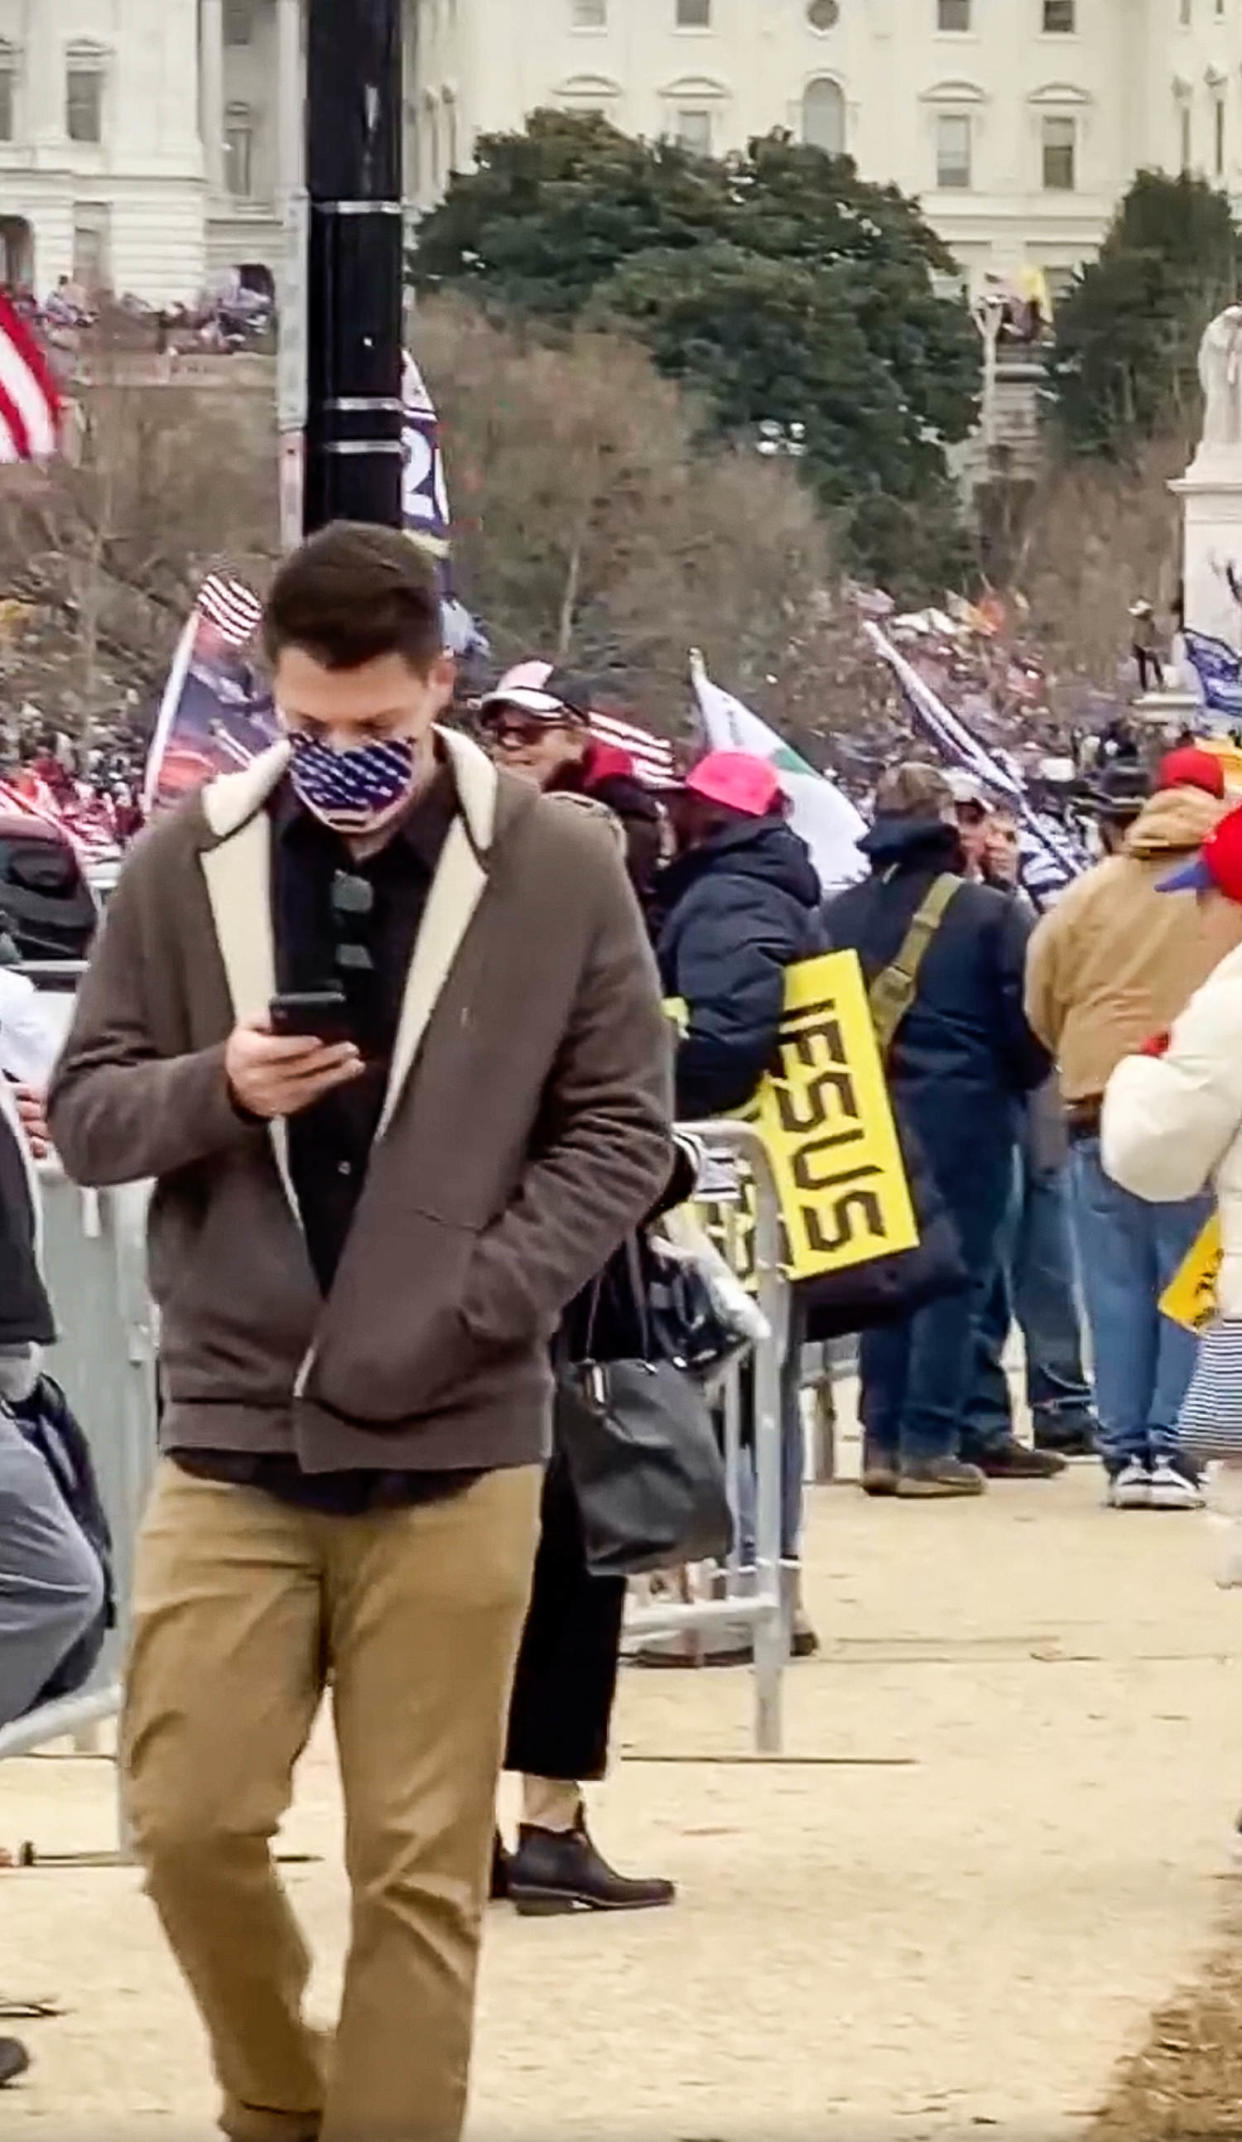 Zach Henry looks at his phone while walking through a crowd at the Capitol on January 6, 2021 (via Facebook)